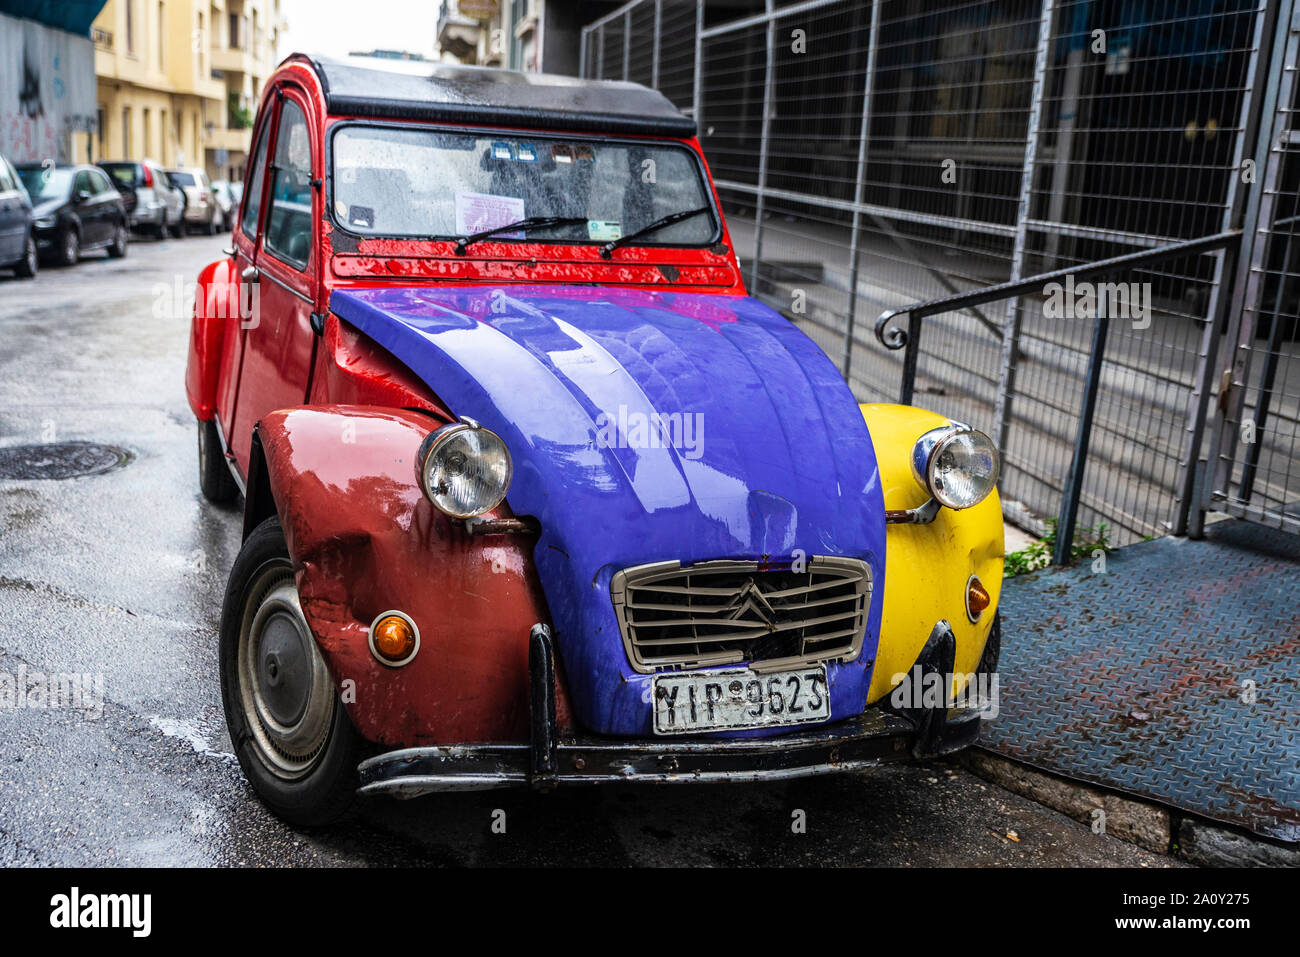 Athens, Greece - December 31, 2018: Red, yellow and blue Citroen 2CV (two steam horses or two tax horsepower) car parked on a street in Athens, Greece Stock Photo